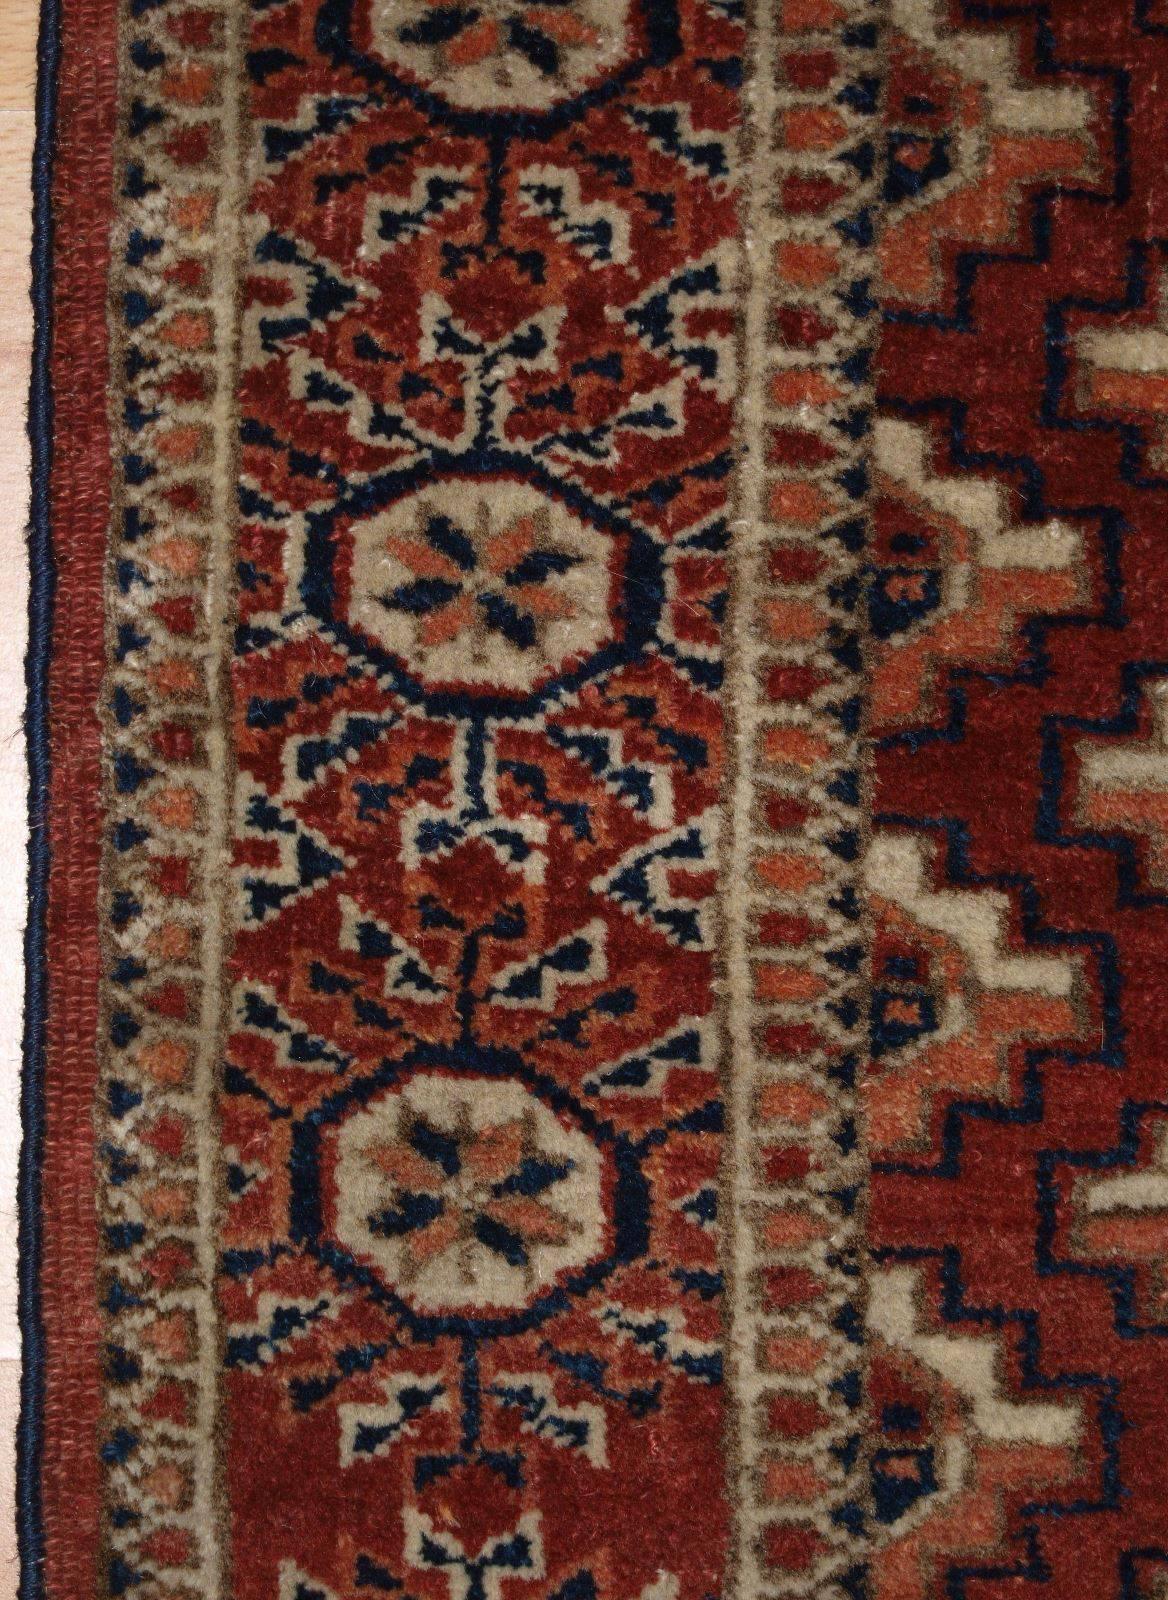 Antique Tekke Turkmen Rug of Small Square Size, circa 1900 In Excellent Condition For Sale In Moreton-in-Marsh, GB